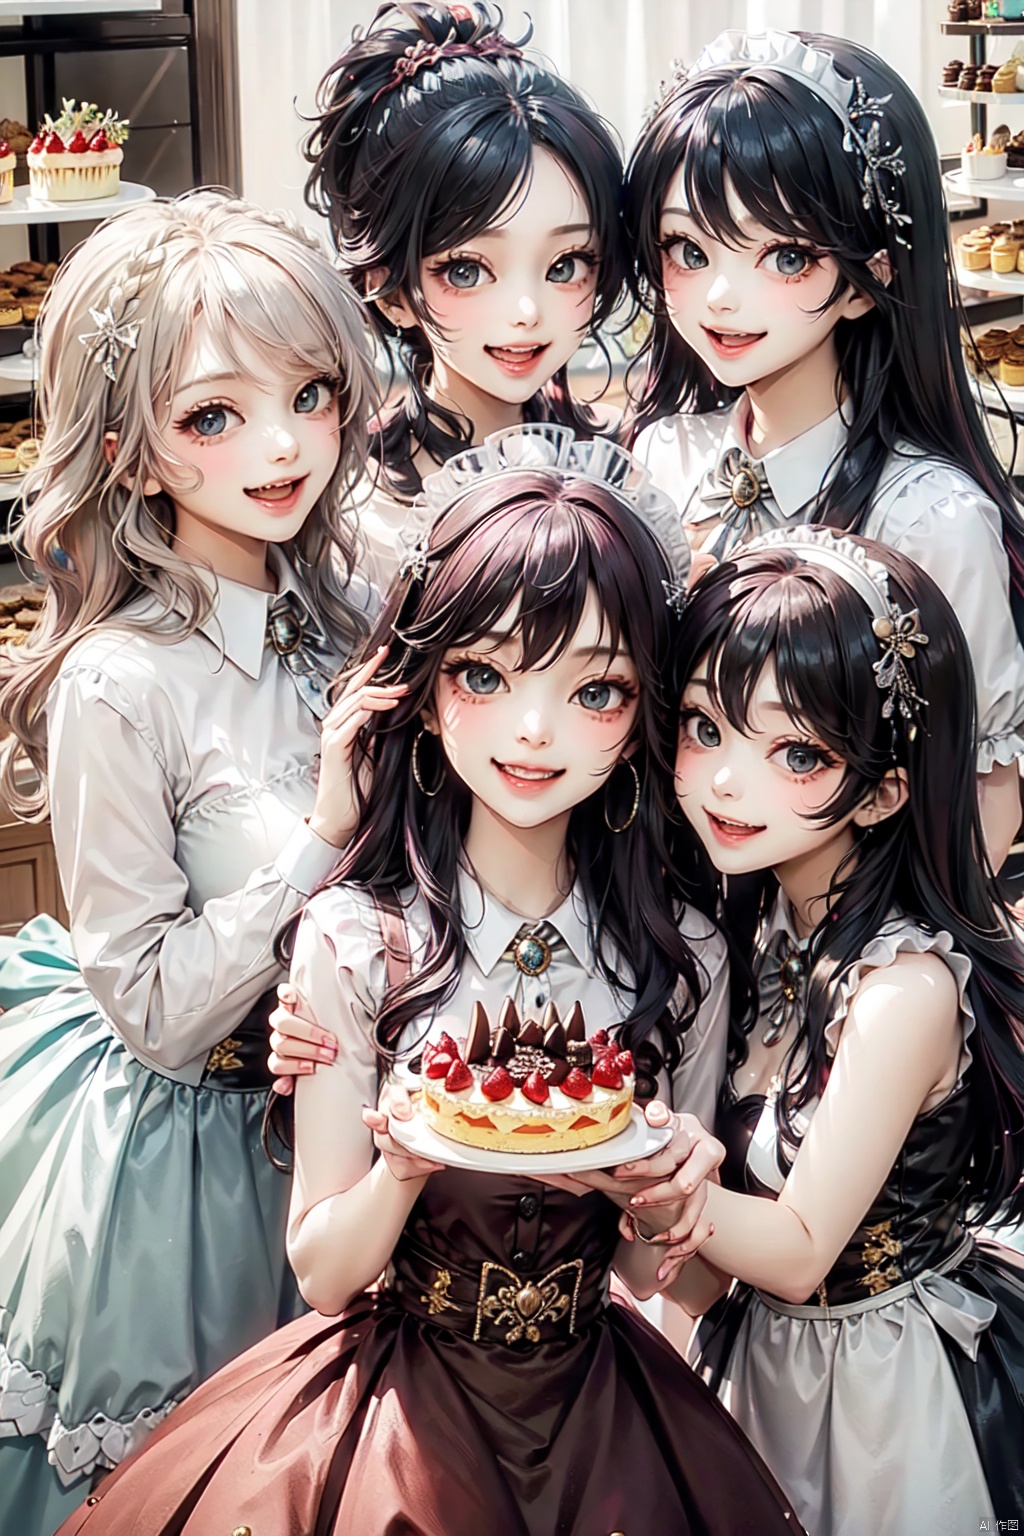  4+ girls, multiple colored hairs, sweet maids, random cute faces, super happy smiling, laughing,group shot, zoom camera, sweet tea party,lots of cakes, macarons, chocolates, parfaits, cookies, land of sweets